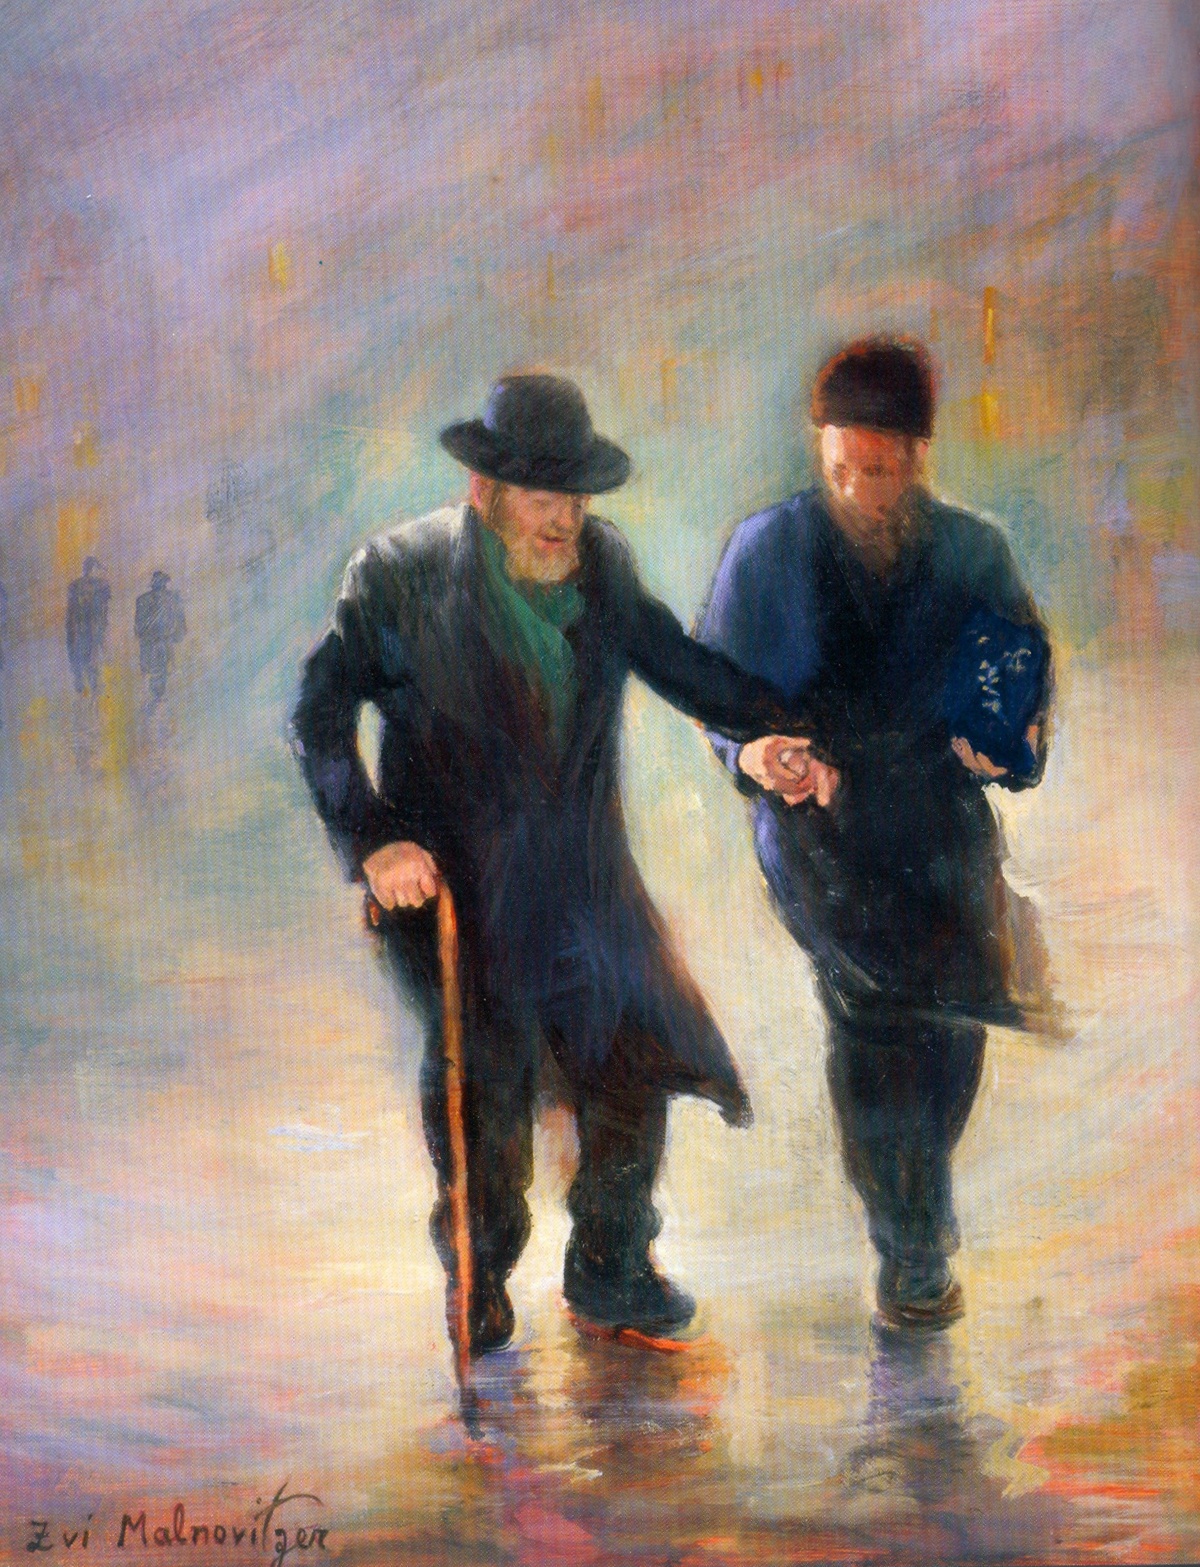 Walking to the Synagogue (2005), oil on canvas by Zvi Malnovitzer Private Collection, New York